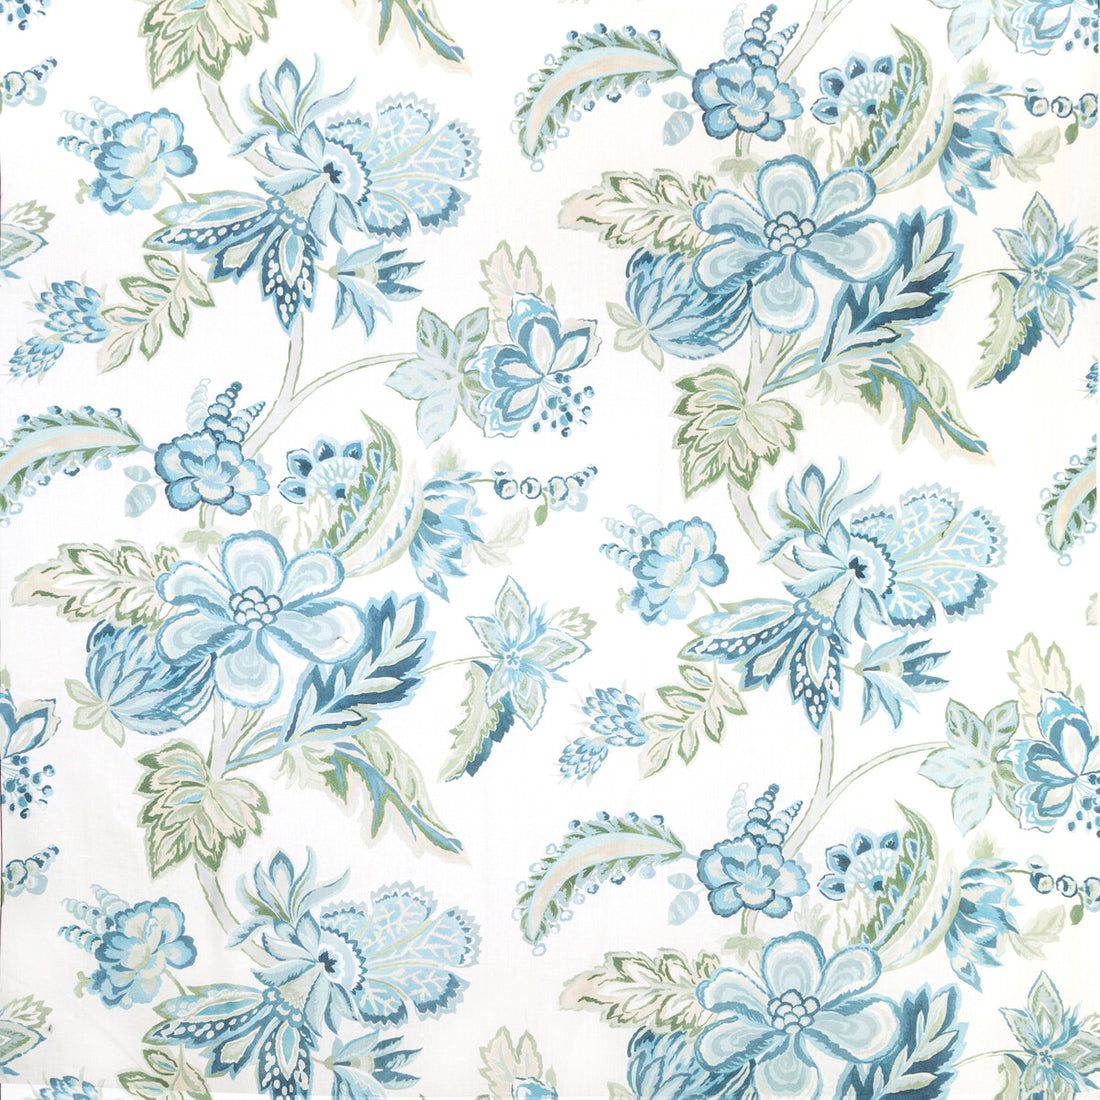 Augustine Print fabric in aqua color - pattern 2020191.13.0 - by Lee Jofa in the Avondale collection